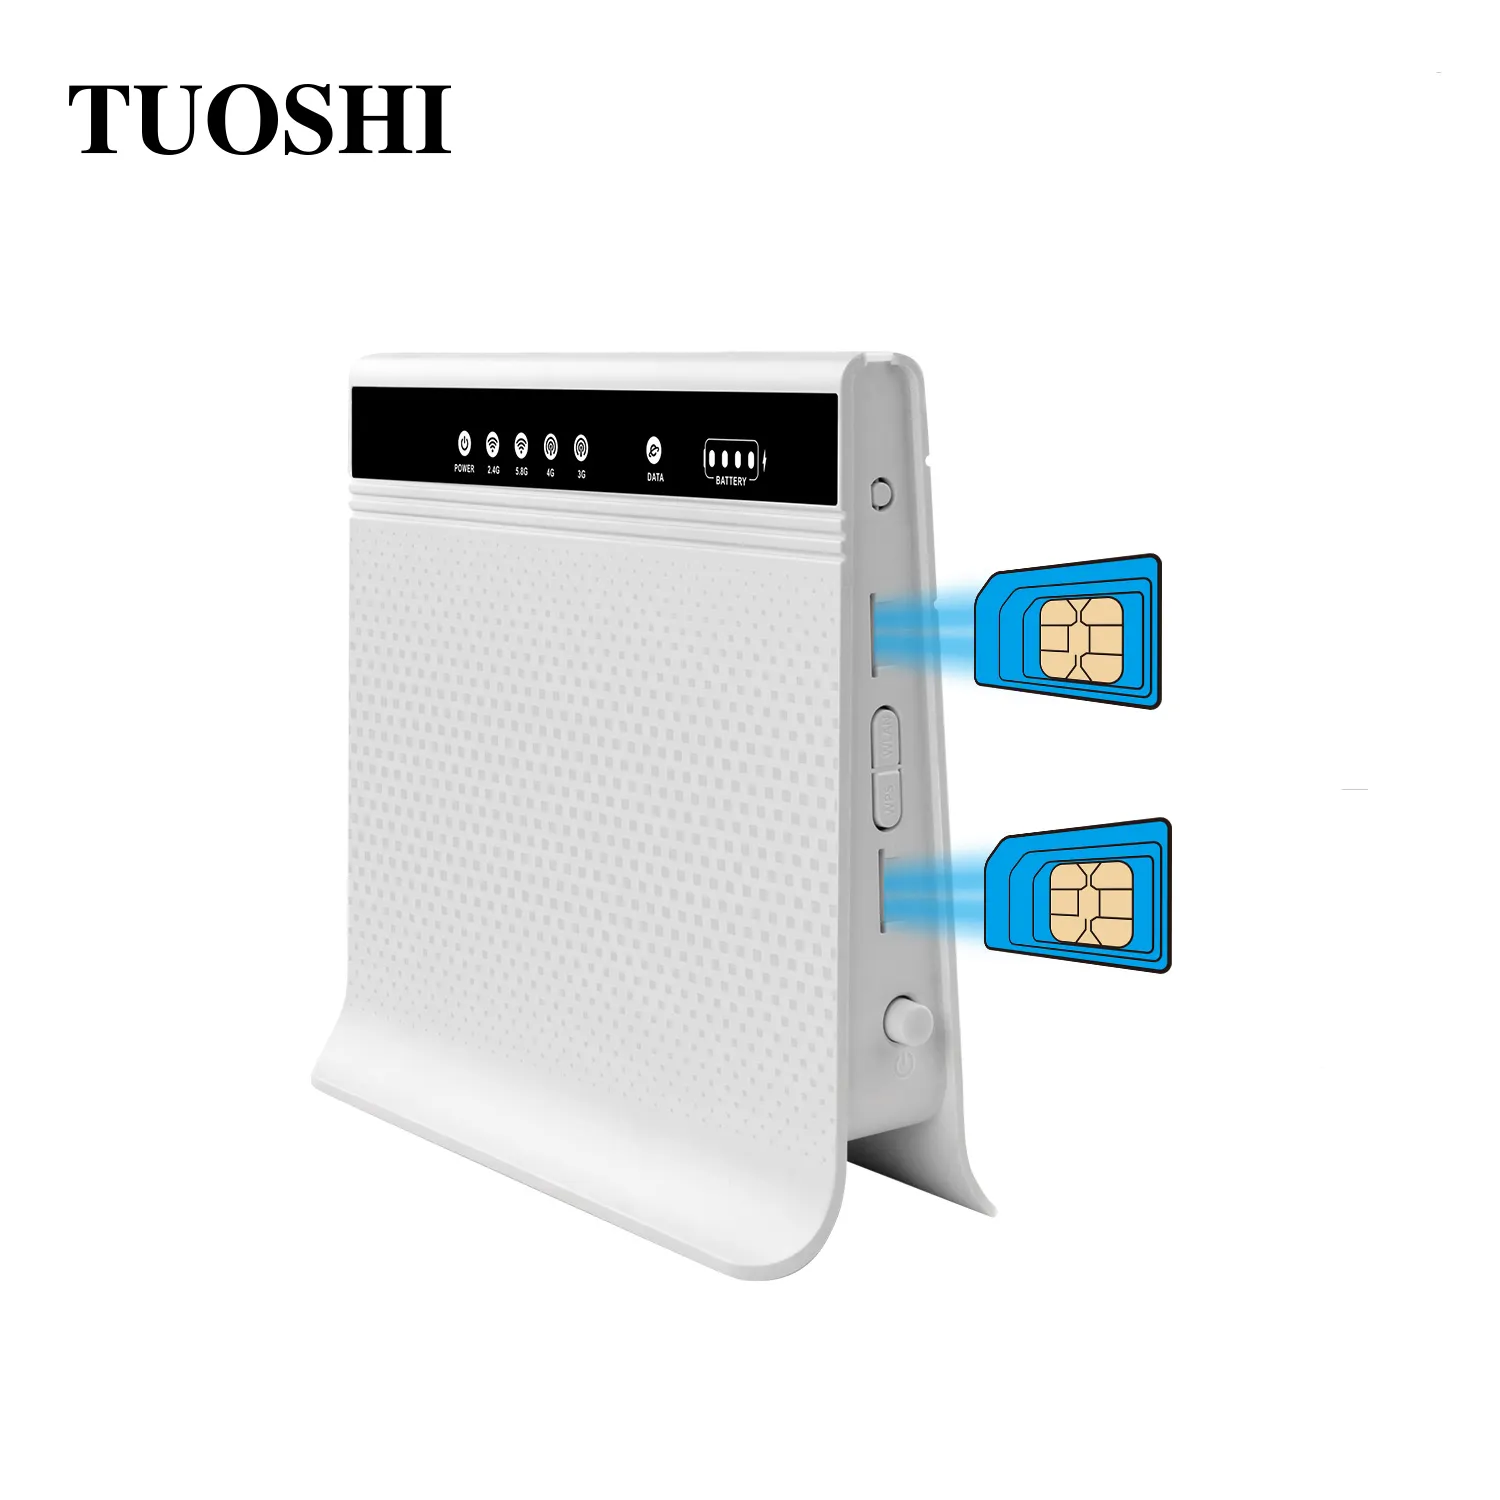 Original Manufacturer 4G LTE Router Dual SIM 2100mAh Battery 2.4G 5G wifi鍋Multi sim Router SMAと着脱式アンテナ